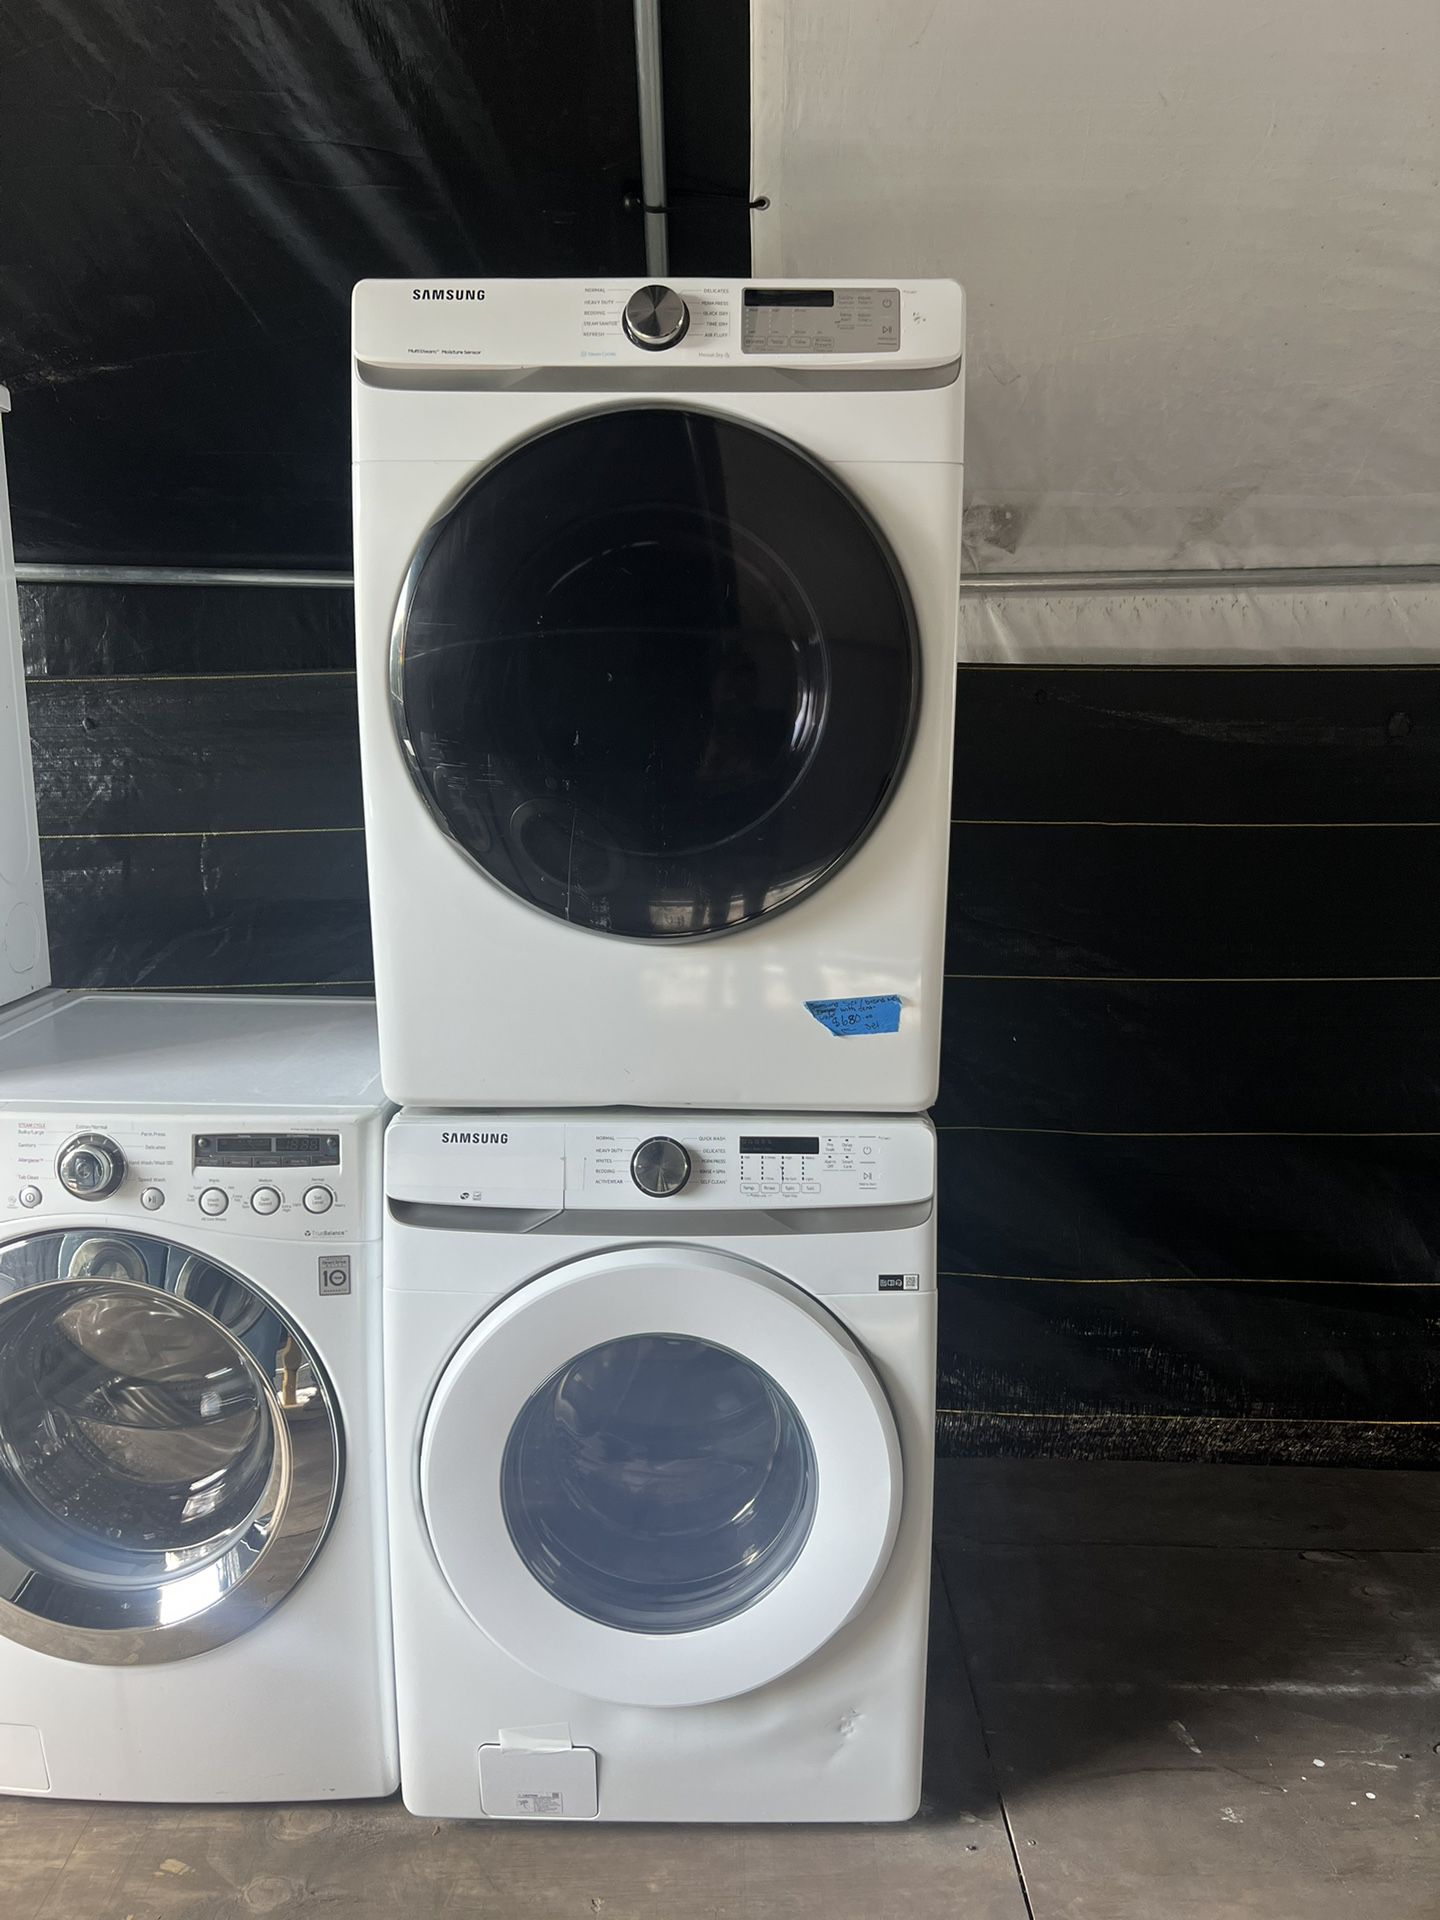 Samsung Washer&dryer Frontload Set  60 day warranty/ Located at:📍5415 Carmack Rd Tampa Fl 33610📍